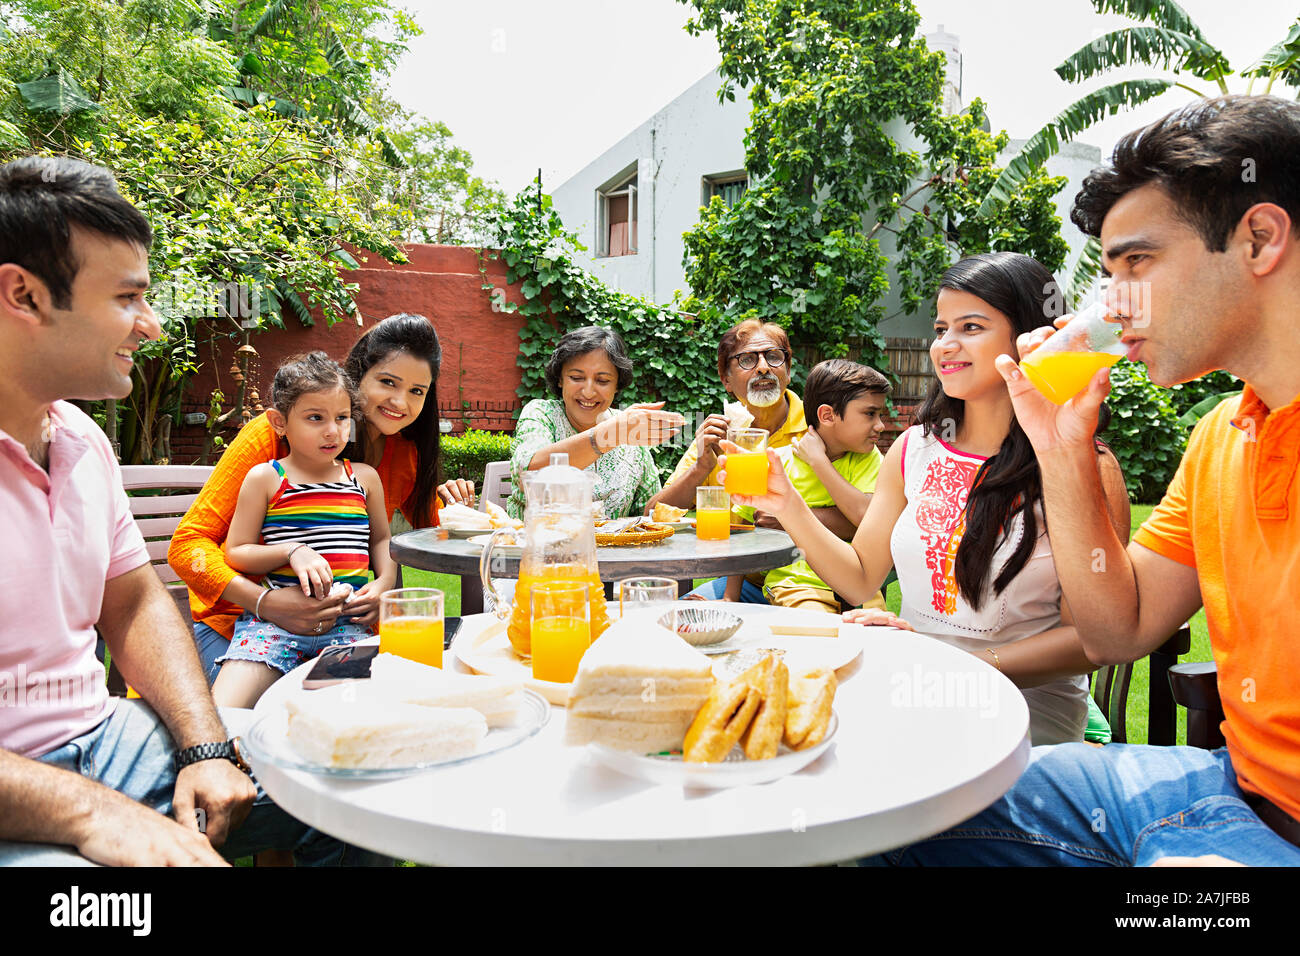 Group-of large Families Eating Healthy Breakfast together in the courtyard of their house Stock Photo